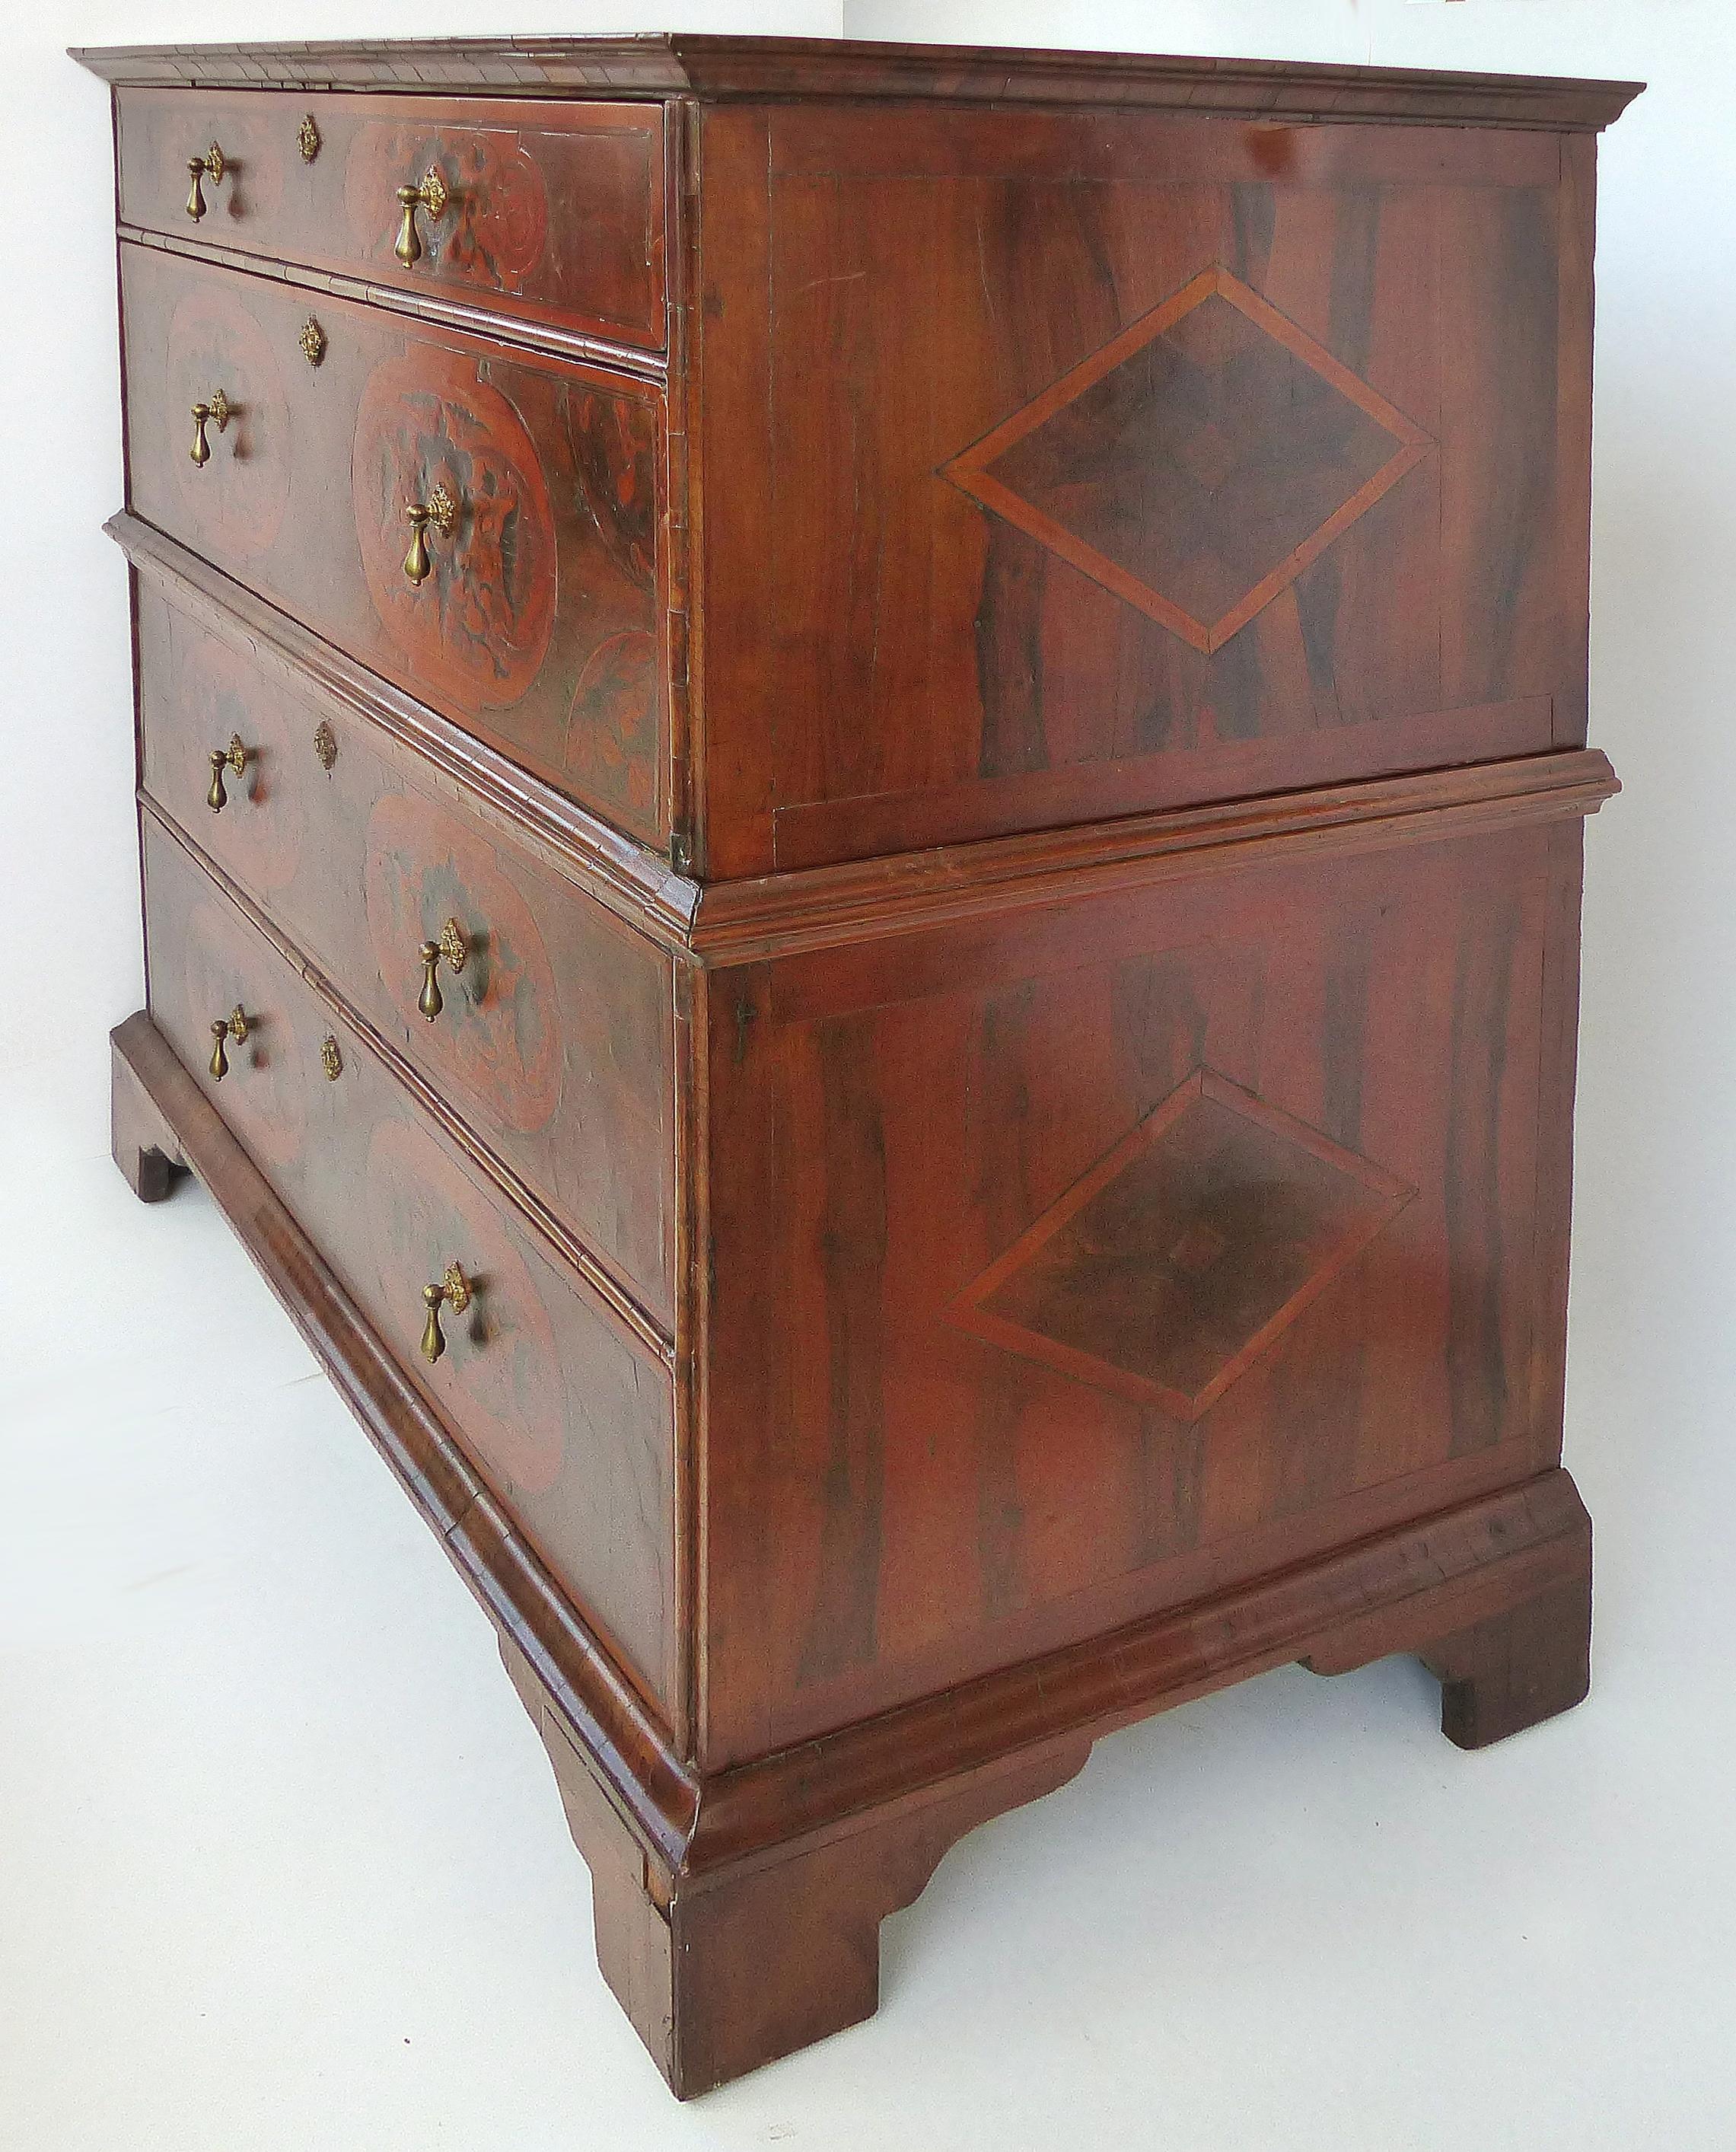 Antique Dutch Marquetry Chest on Chest

Offered for sale is an early 19th century or possibly earlier Dutch marquetry chest on chest with two drawers in each section which are raised on simple bracket feet. This wonderfully detailed marquetry chest